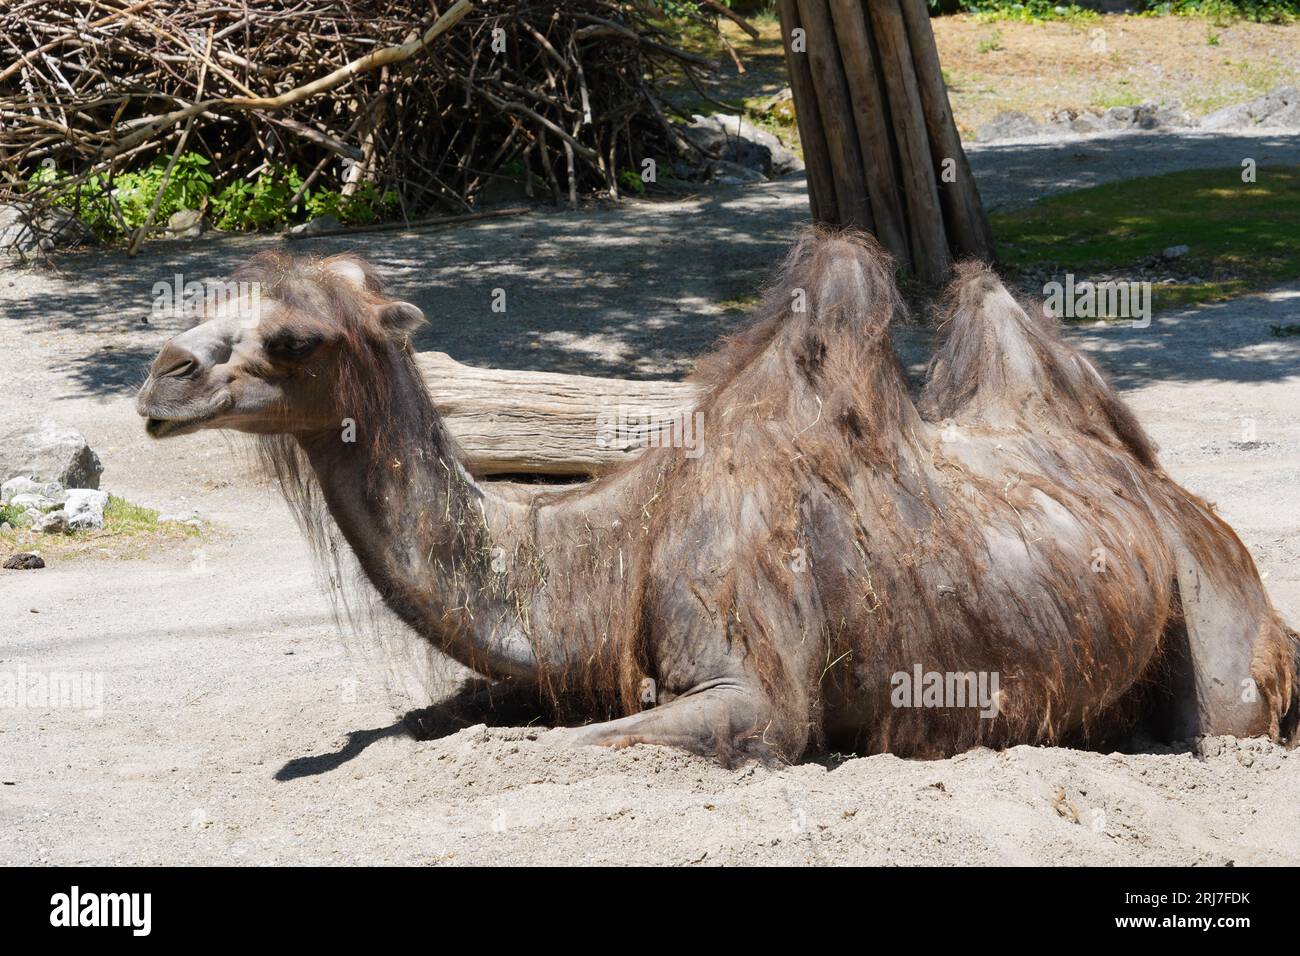 Bactrian camel in Latin called Camelus bactrianus is settled on the ground and is captured in side view. The animal is in the middle of the picture. Stock Photo